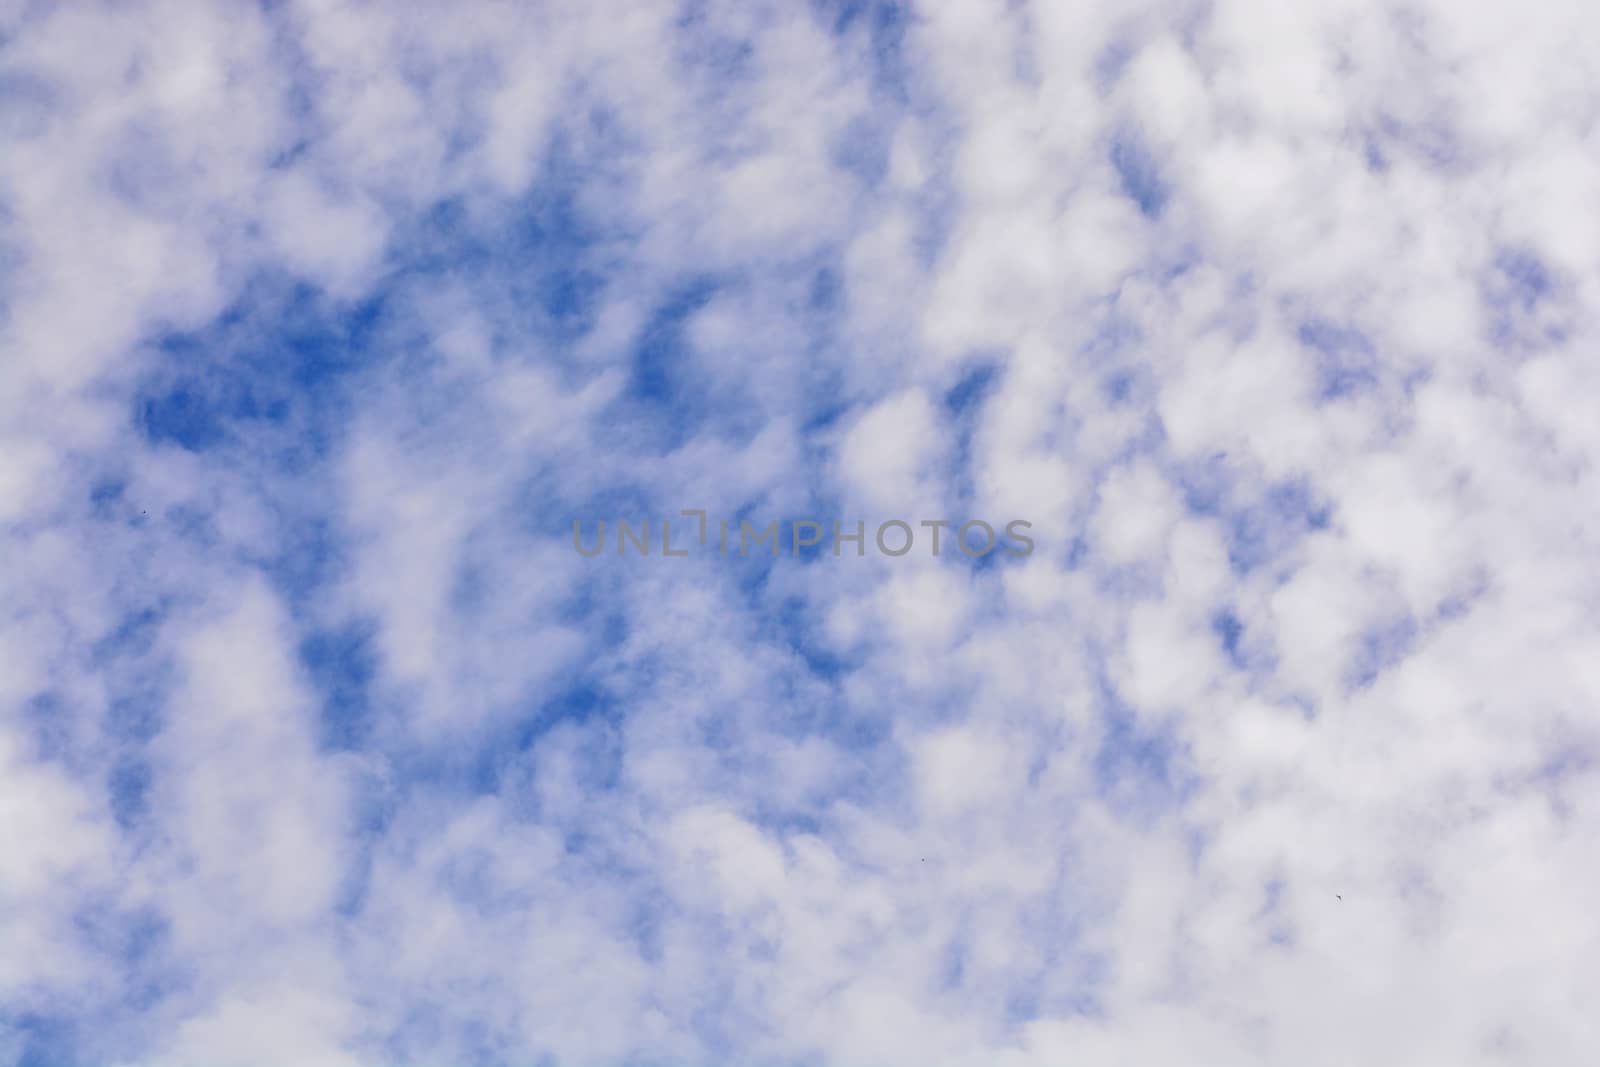 Clouds in the blue sky by ideation90